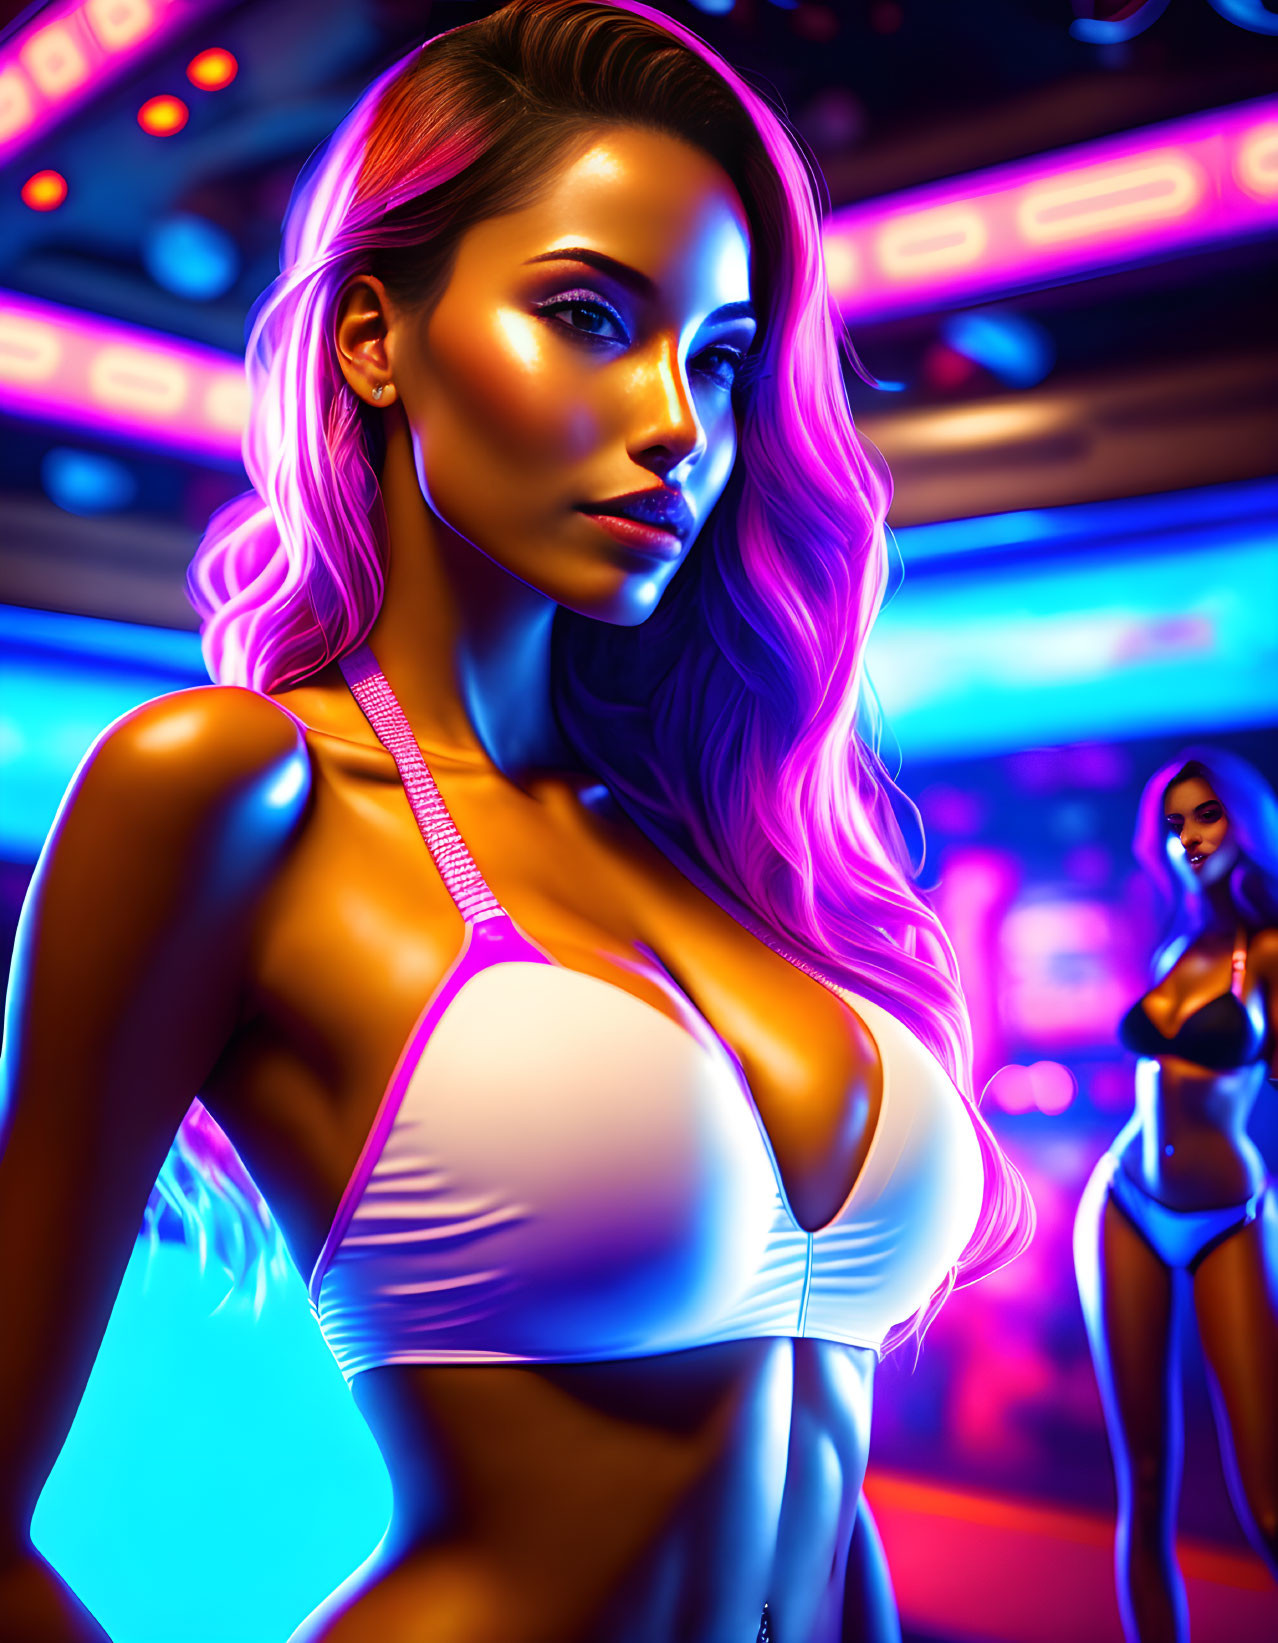 Neon-lit club scene with glowing woman and background figure